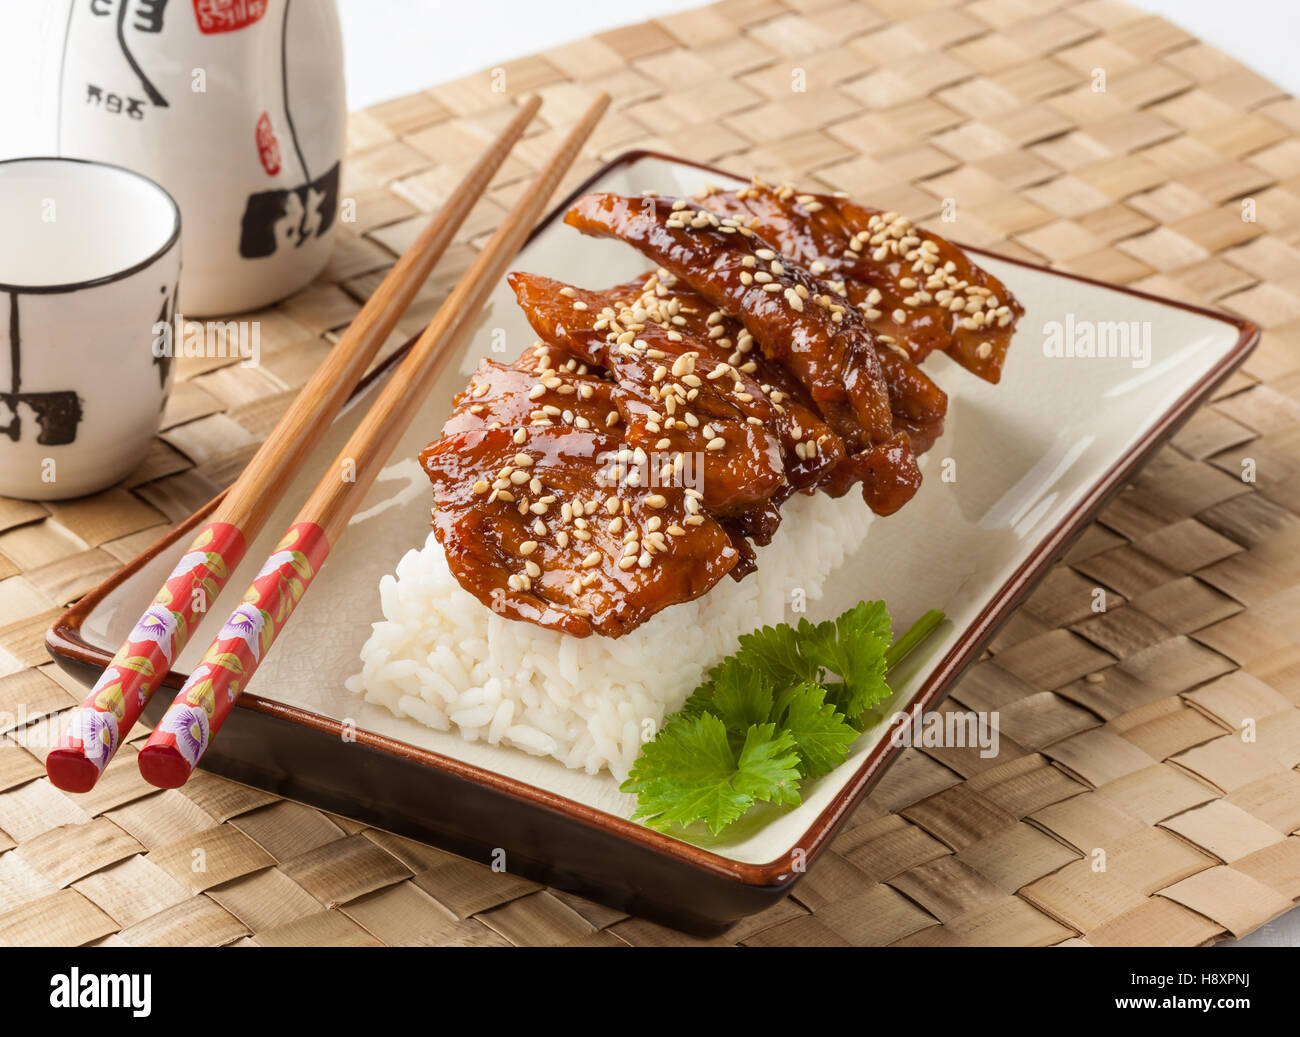 Teriyaki chicken served with rice on a rectangular plate. Stock Photo